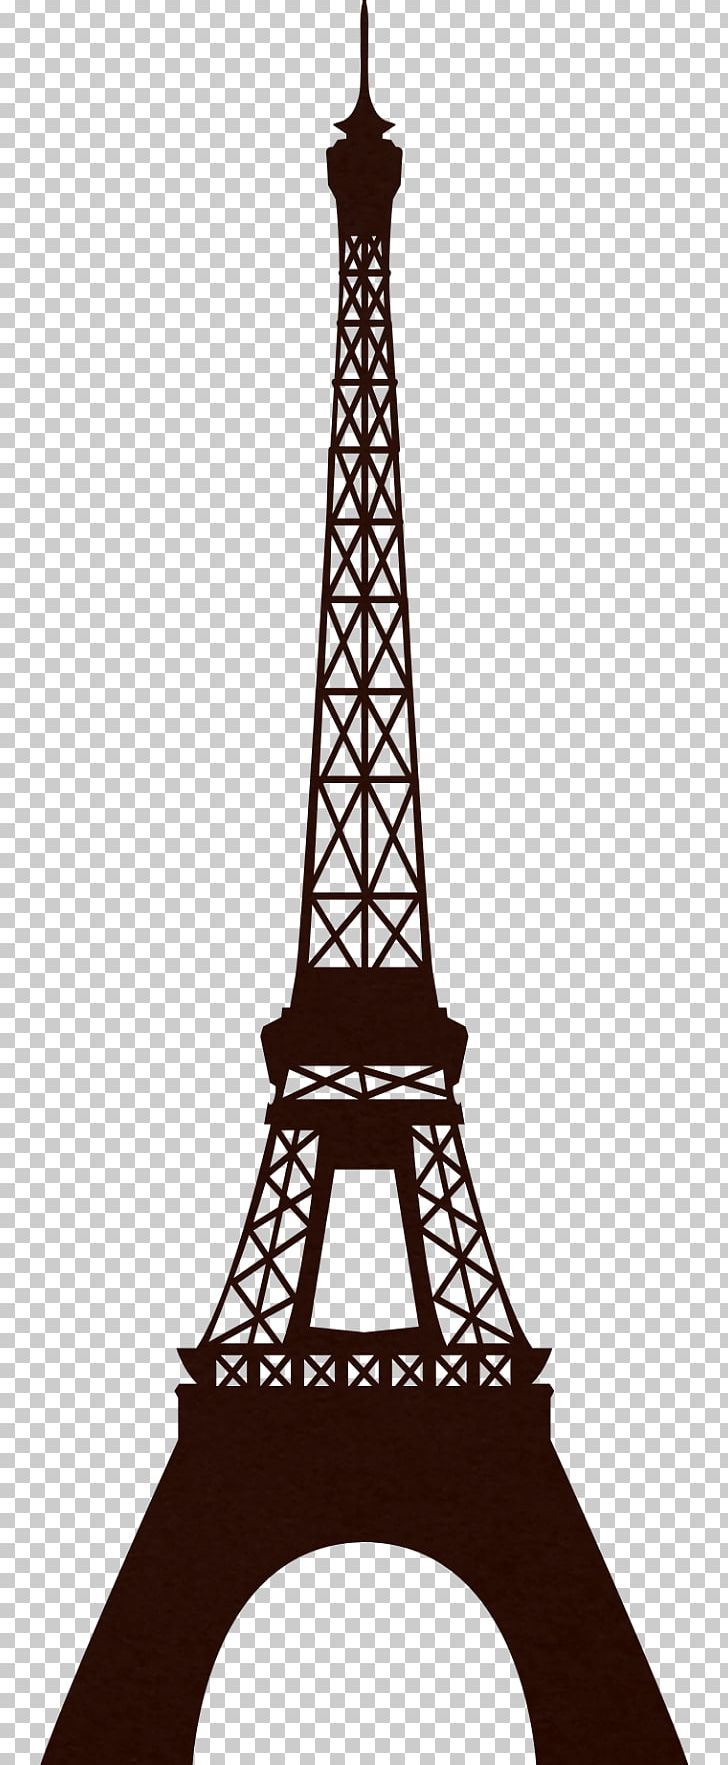 Eiffel Tower Silhouette PNG, Clipart, Clip Art, Drawing, Eiffel Tower, Encapsulated Postscript, Landmark Free PNG Download